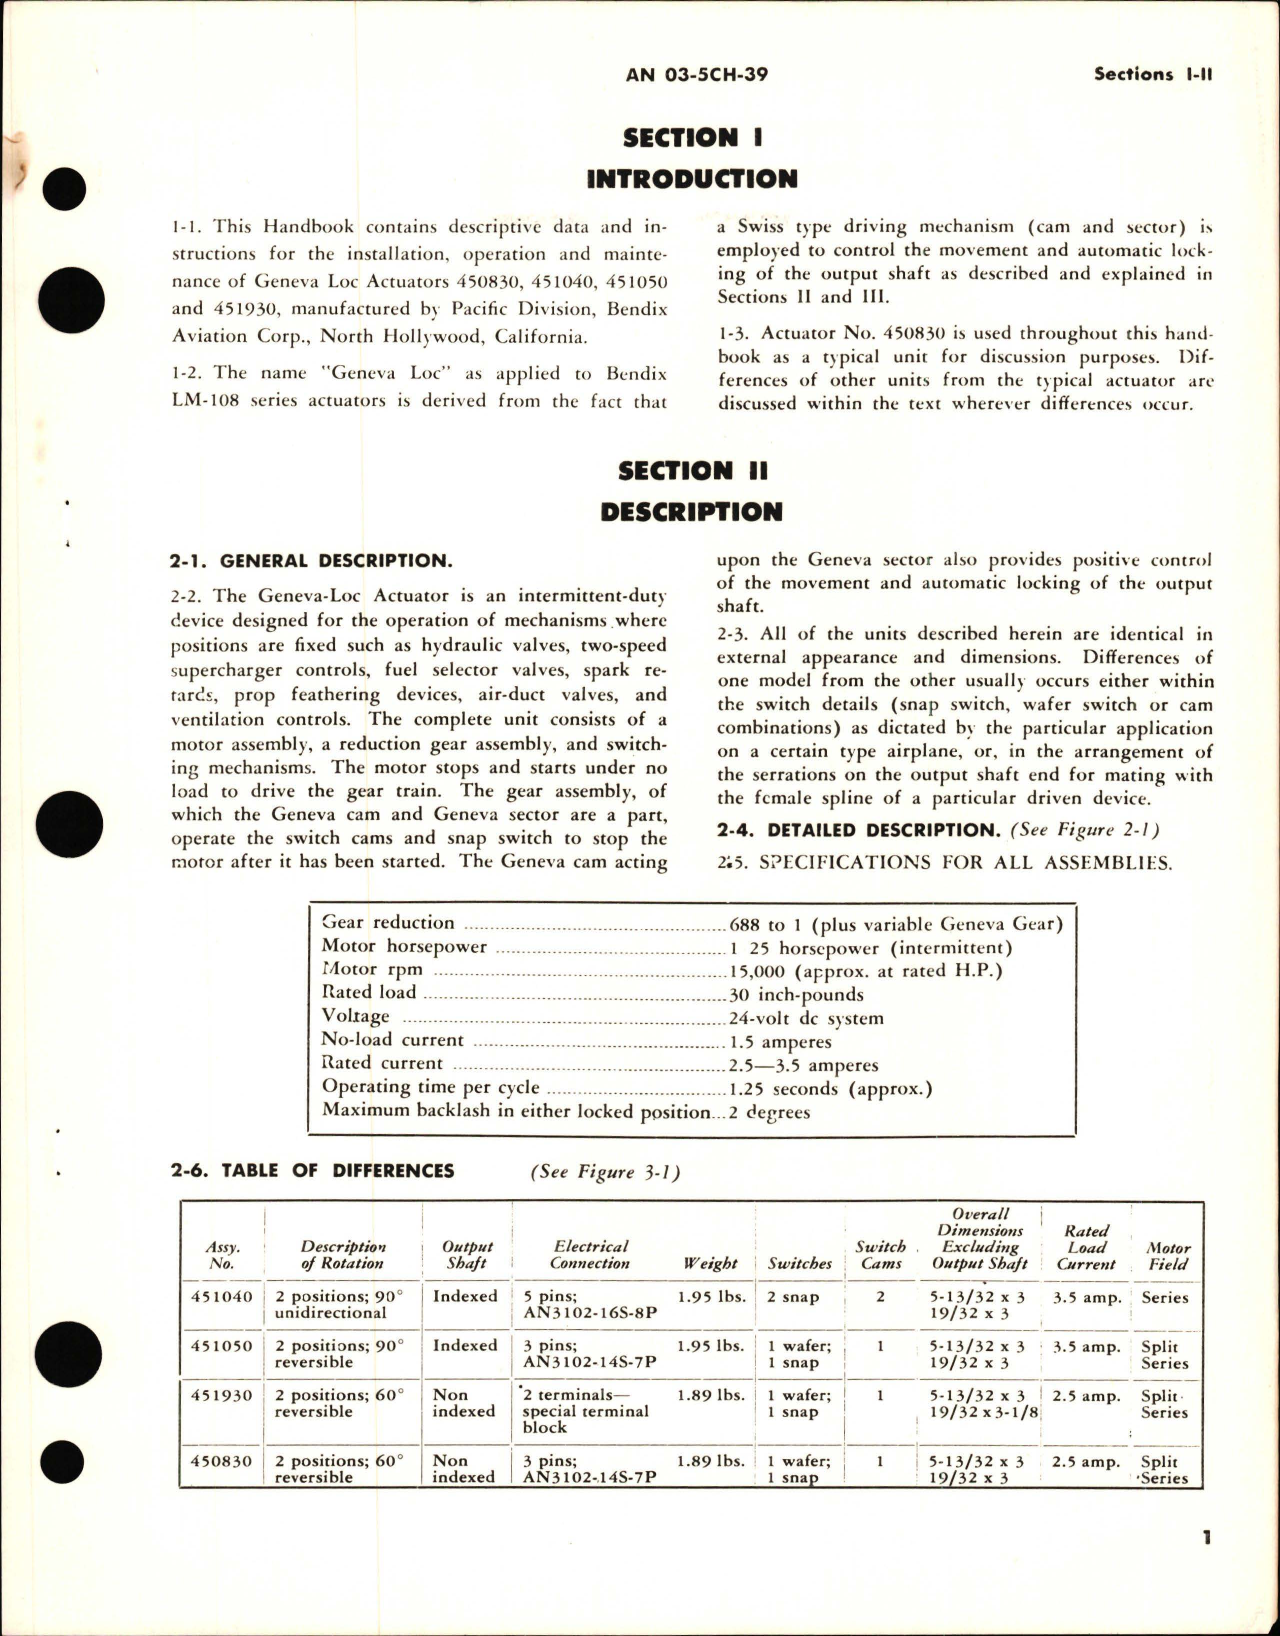 Sample page 5 from AirCorps Library document: Operation and Service Instructions for Geneva Loc Actuators - Models 450830, 451040, 451050 and 451930 